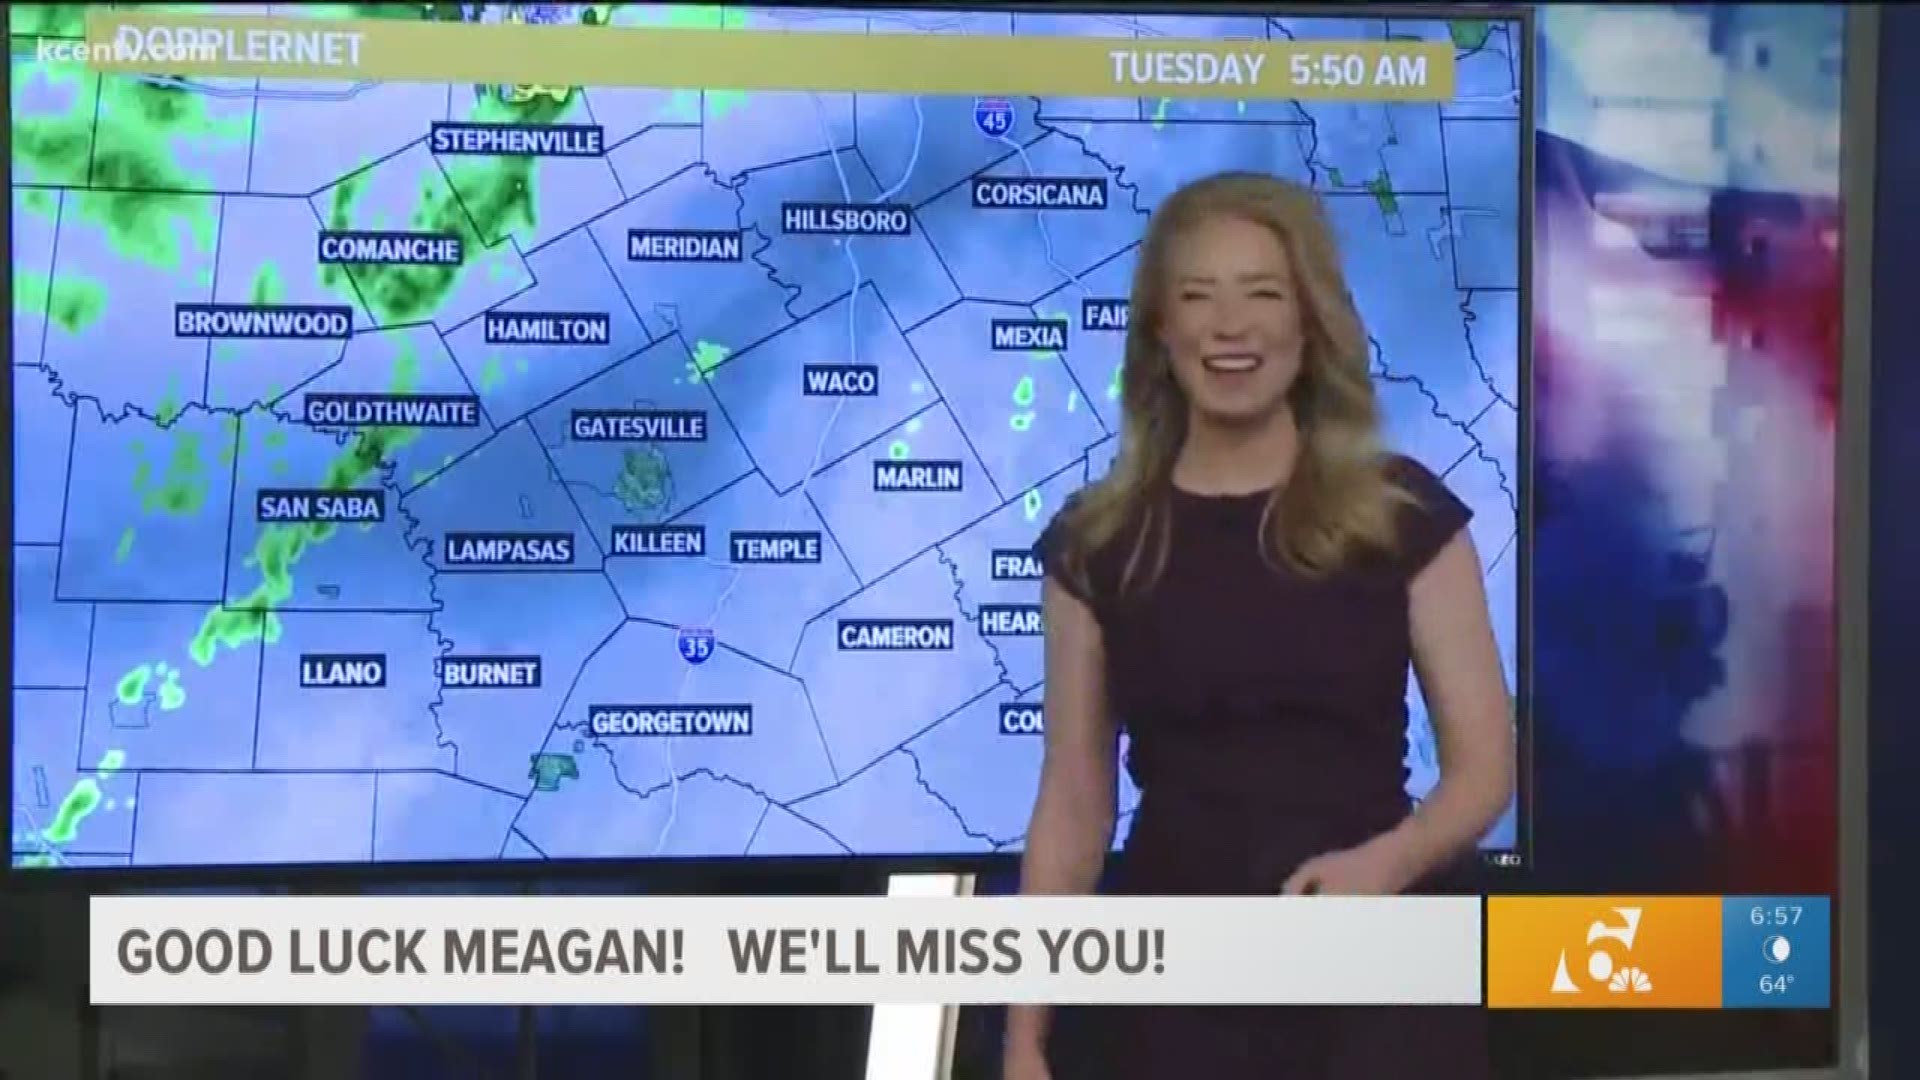 Help us wish Meagan Massey luck as she makes her way to San Antonio where she'll forecast the weather at KENS! We'll miss you, Meagan!